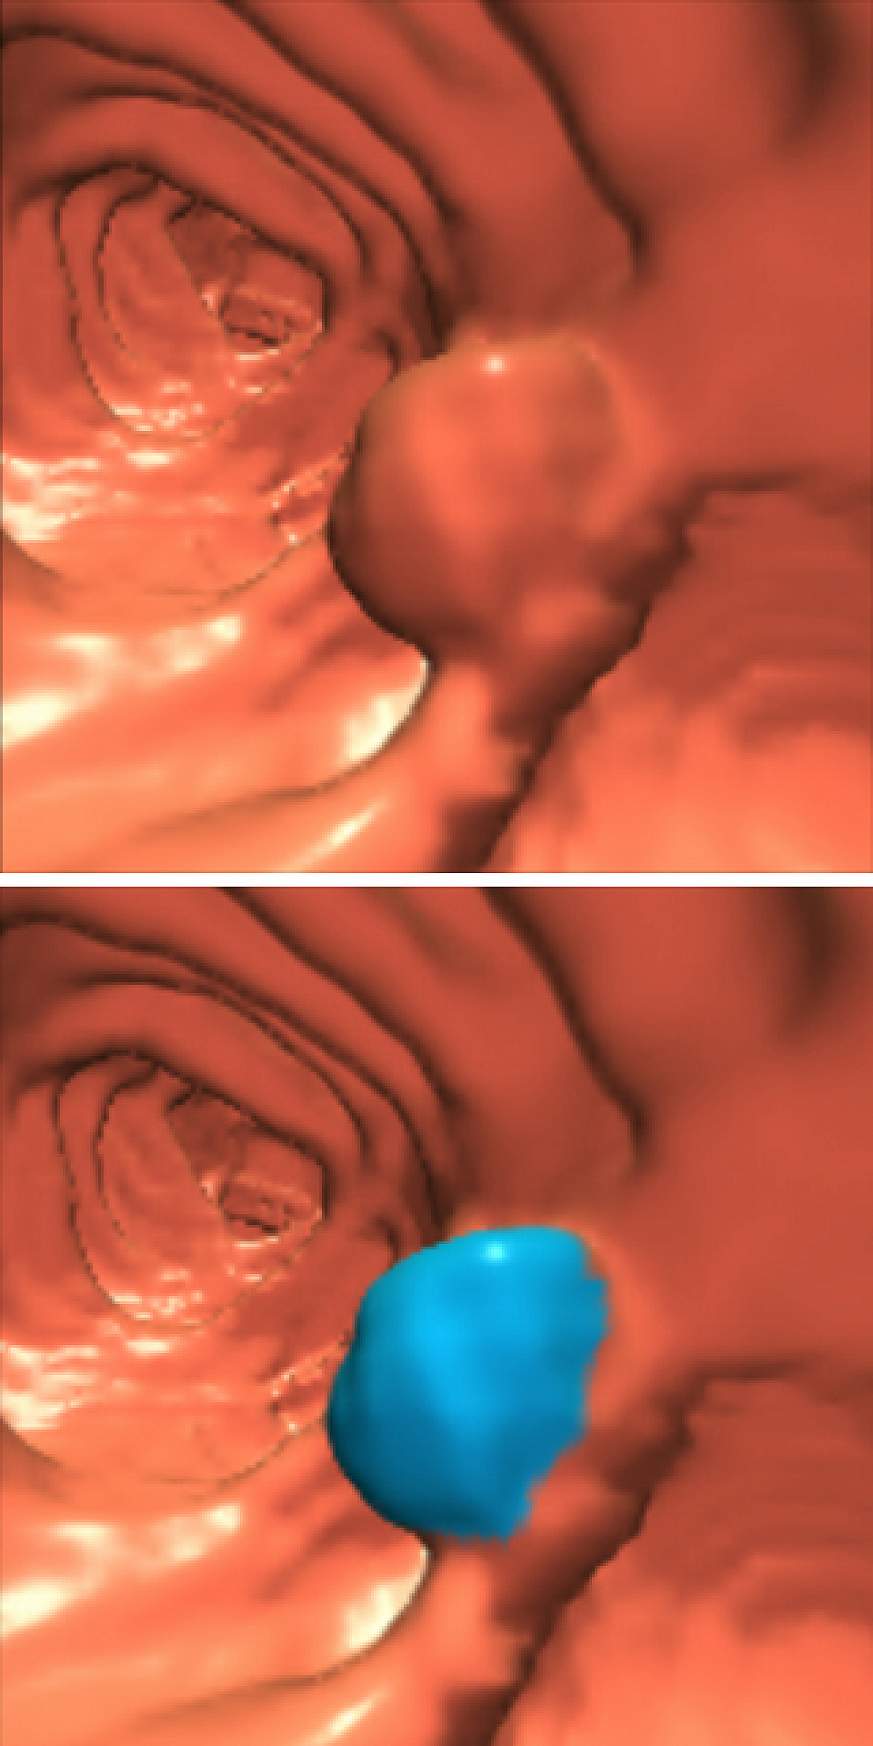 Computer generated image of a colon polyp.